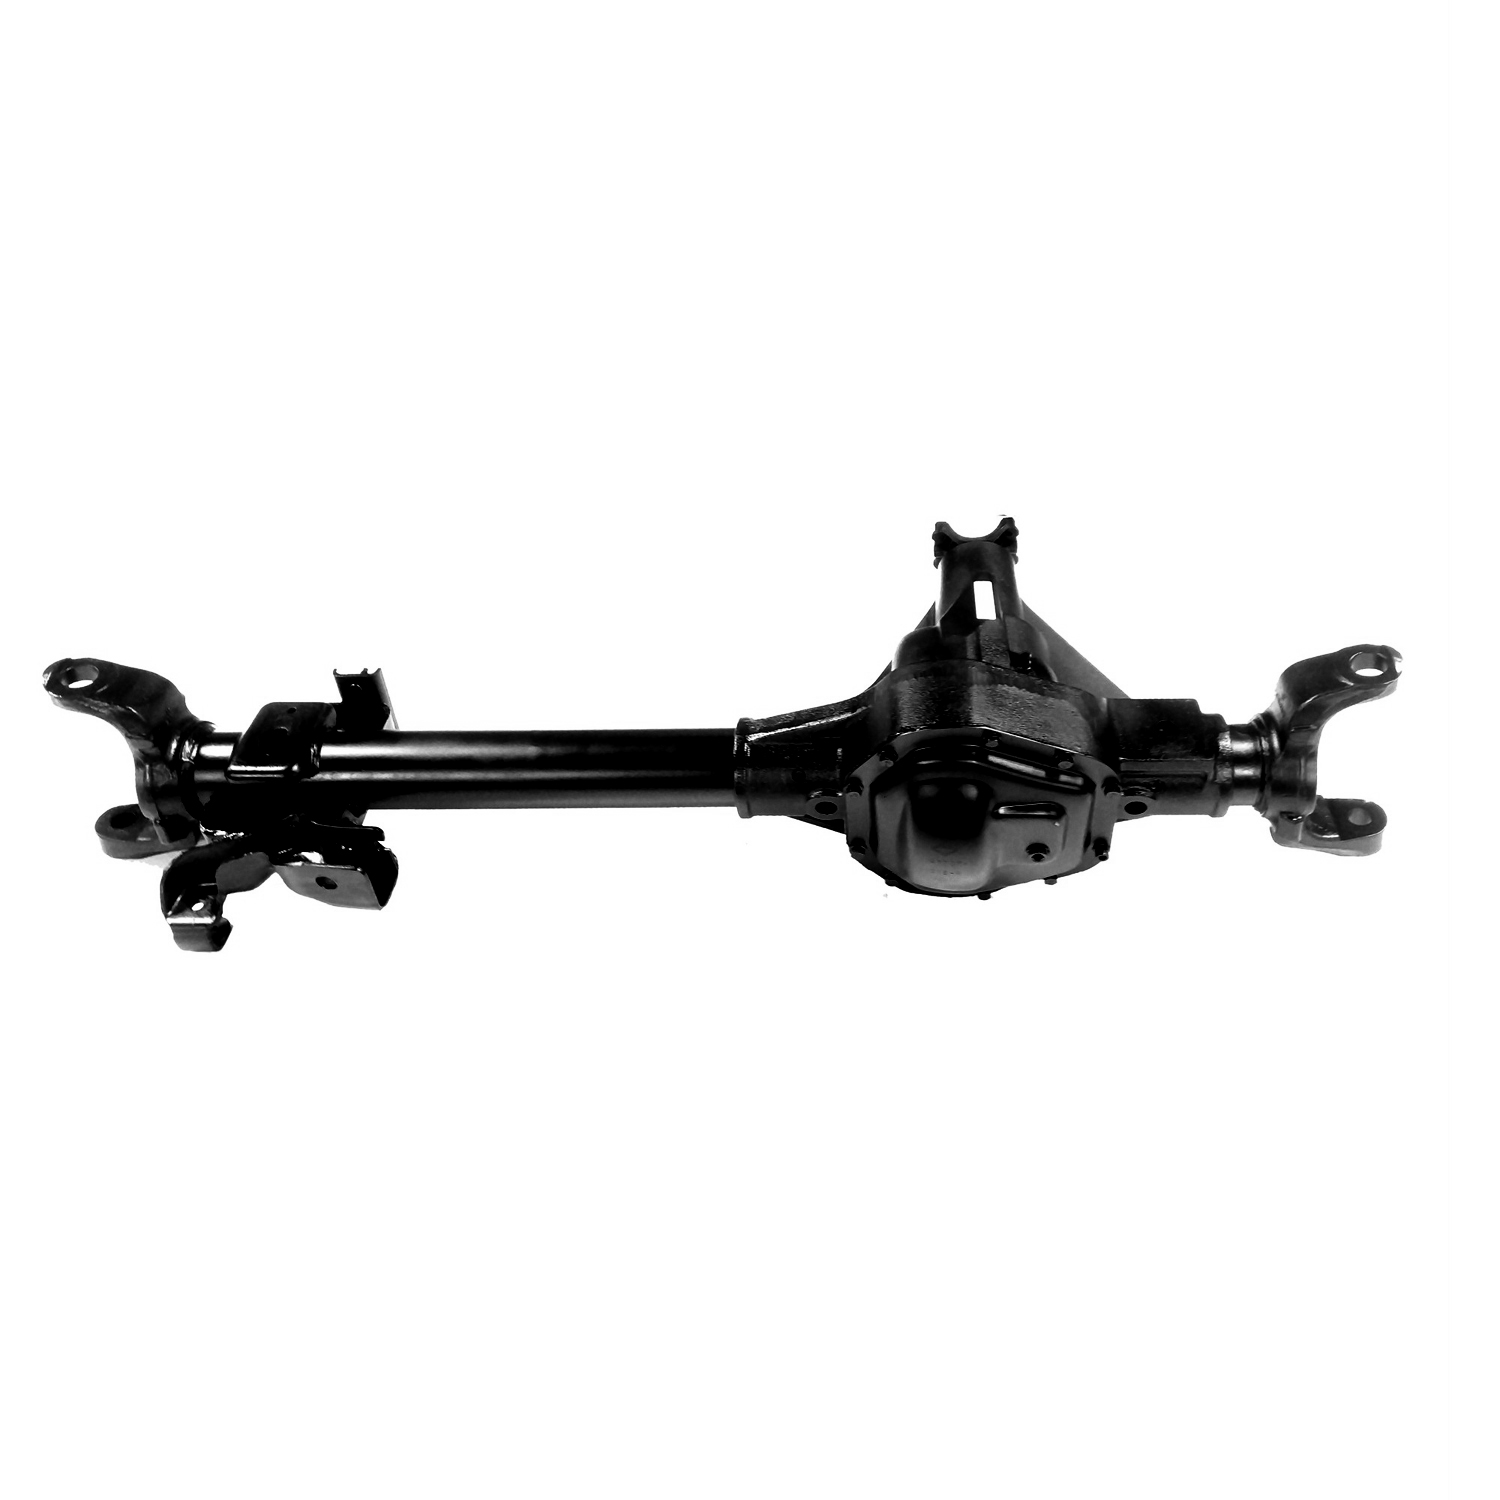 Reman Axle Assembly for Dana 60 2005-07 Ford F250 & F350 SRW 4.10 Ratio